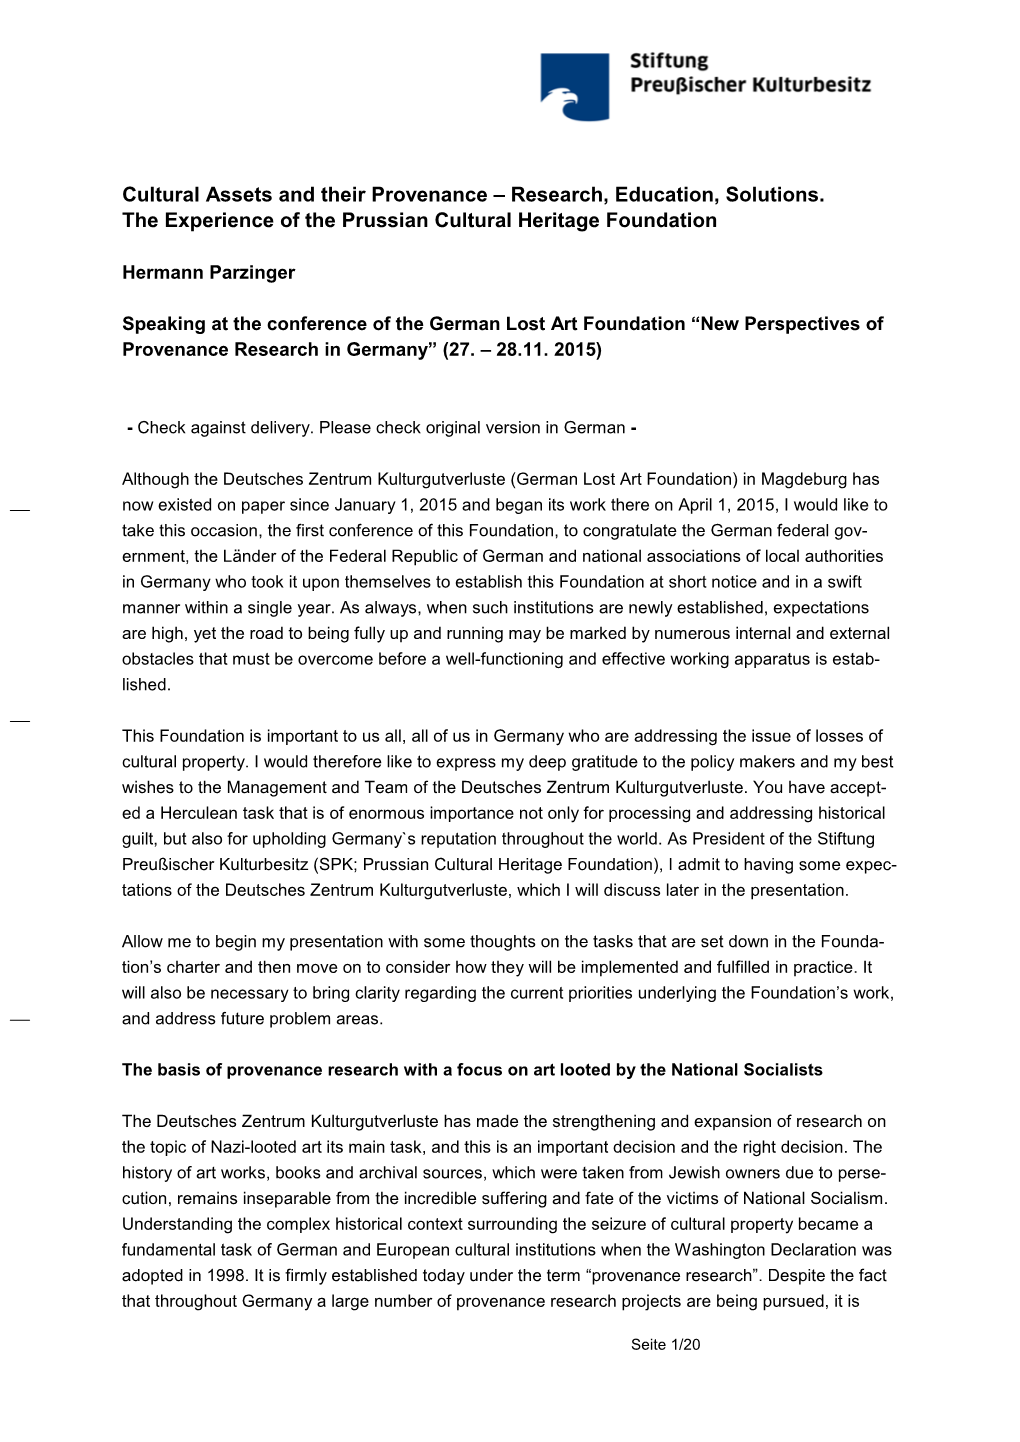 Cultural Assets and Their Provenance – Research, Education, Solutions. the Experience of the Prussian Cultural Heritage Foundation